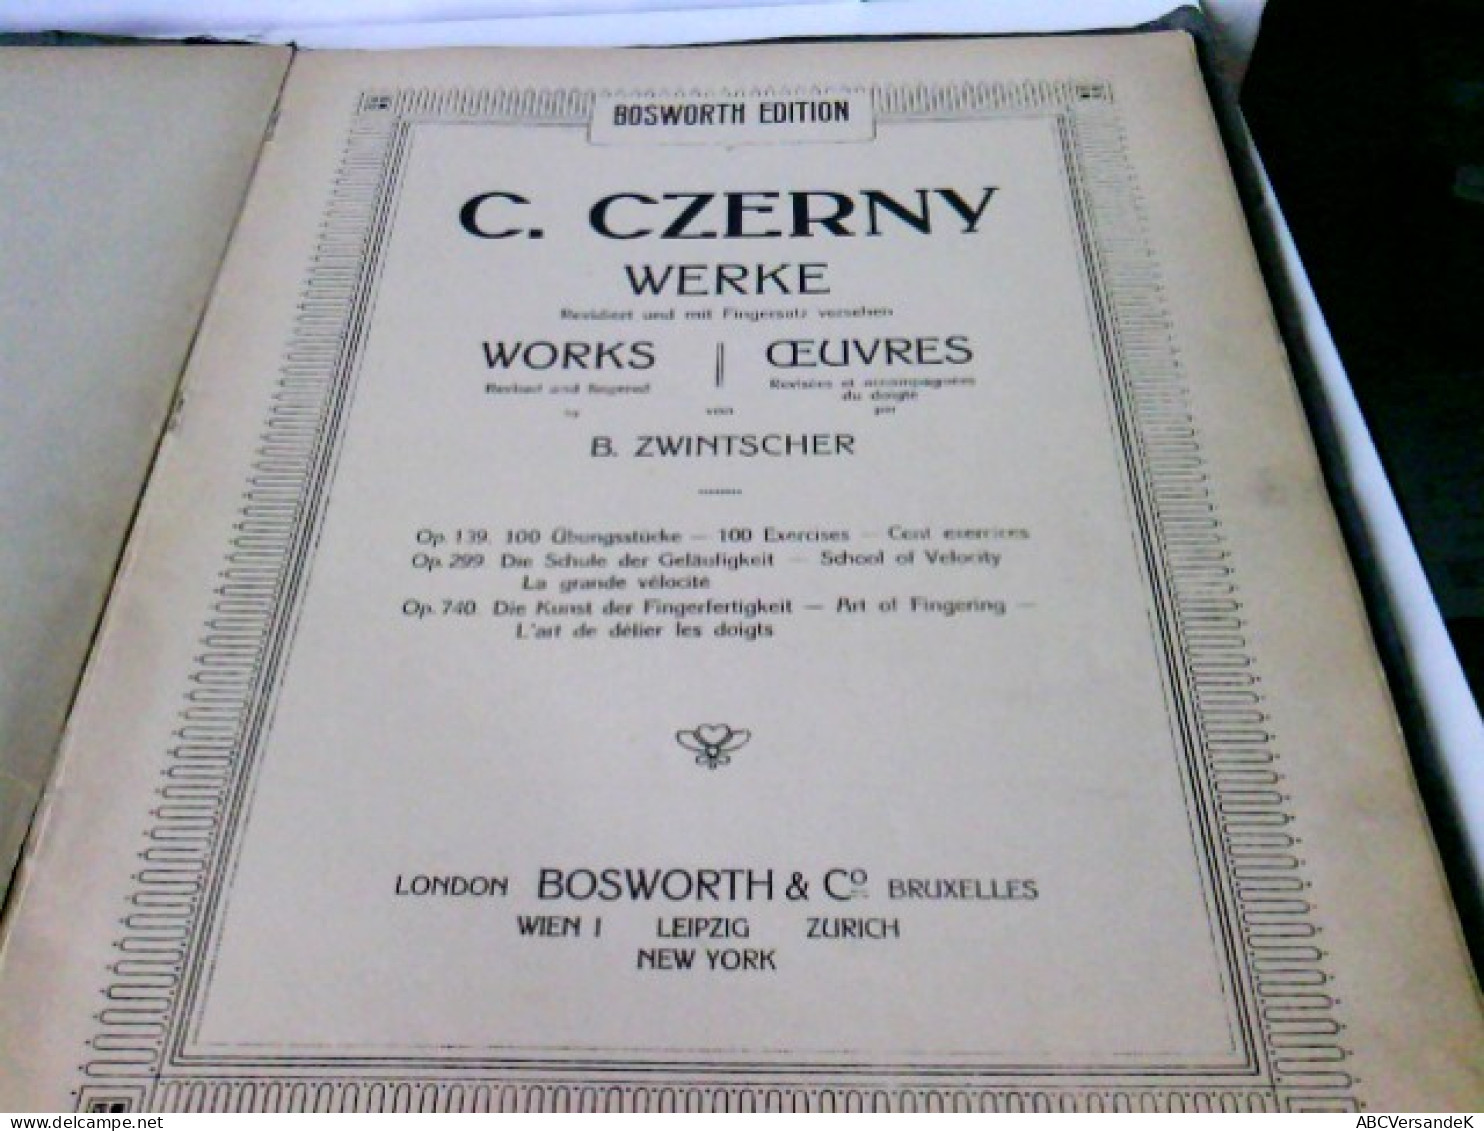 Opus 139. 100 Uebungsstücke - 100 Exercises - Cent Exercices: Bosworth Edition (B & Co. 892. 2392/3) - Musik